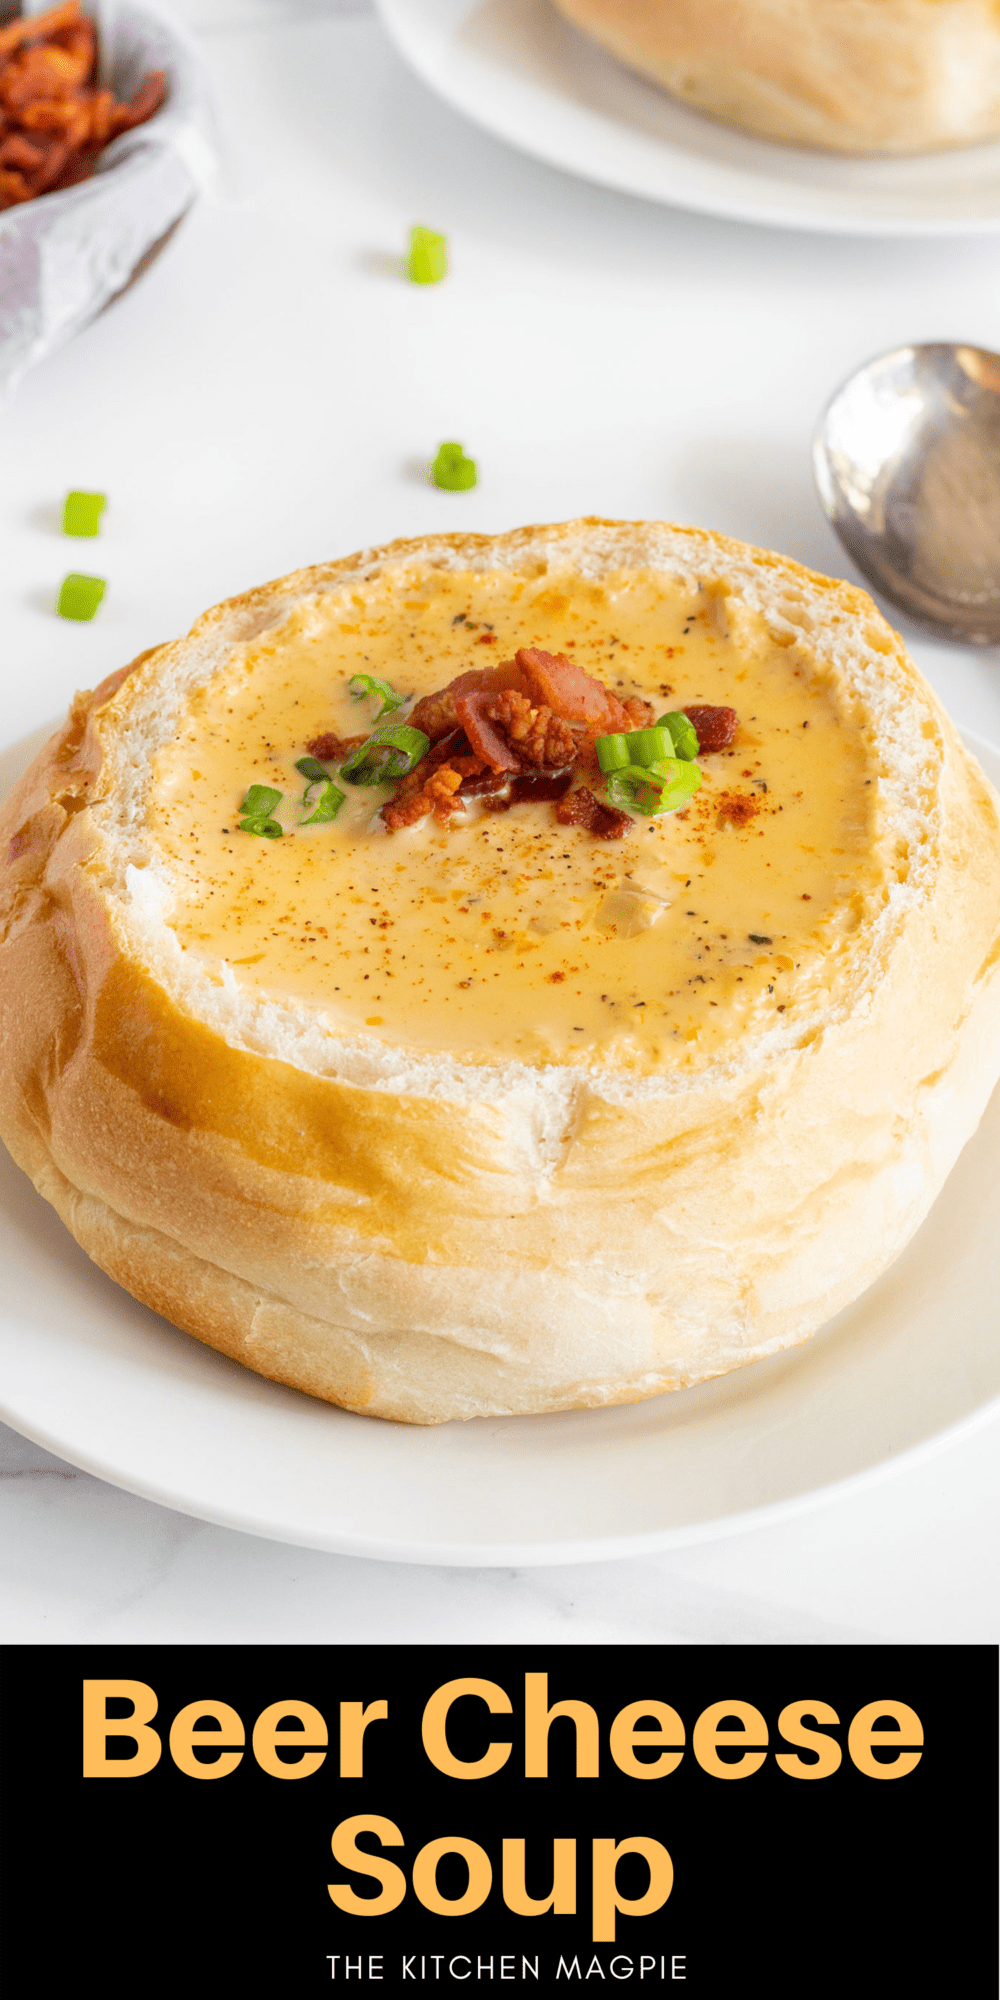 How to make a rich, decadent beer cheese soup that is the perfect comforting dinner or lunch. Serve in bread bowls for an extra special meal.